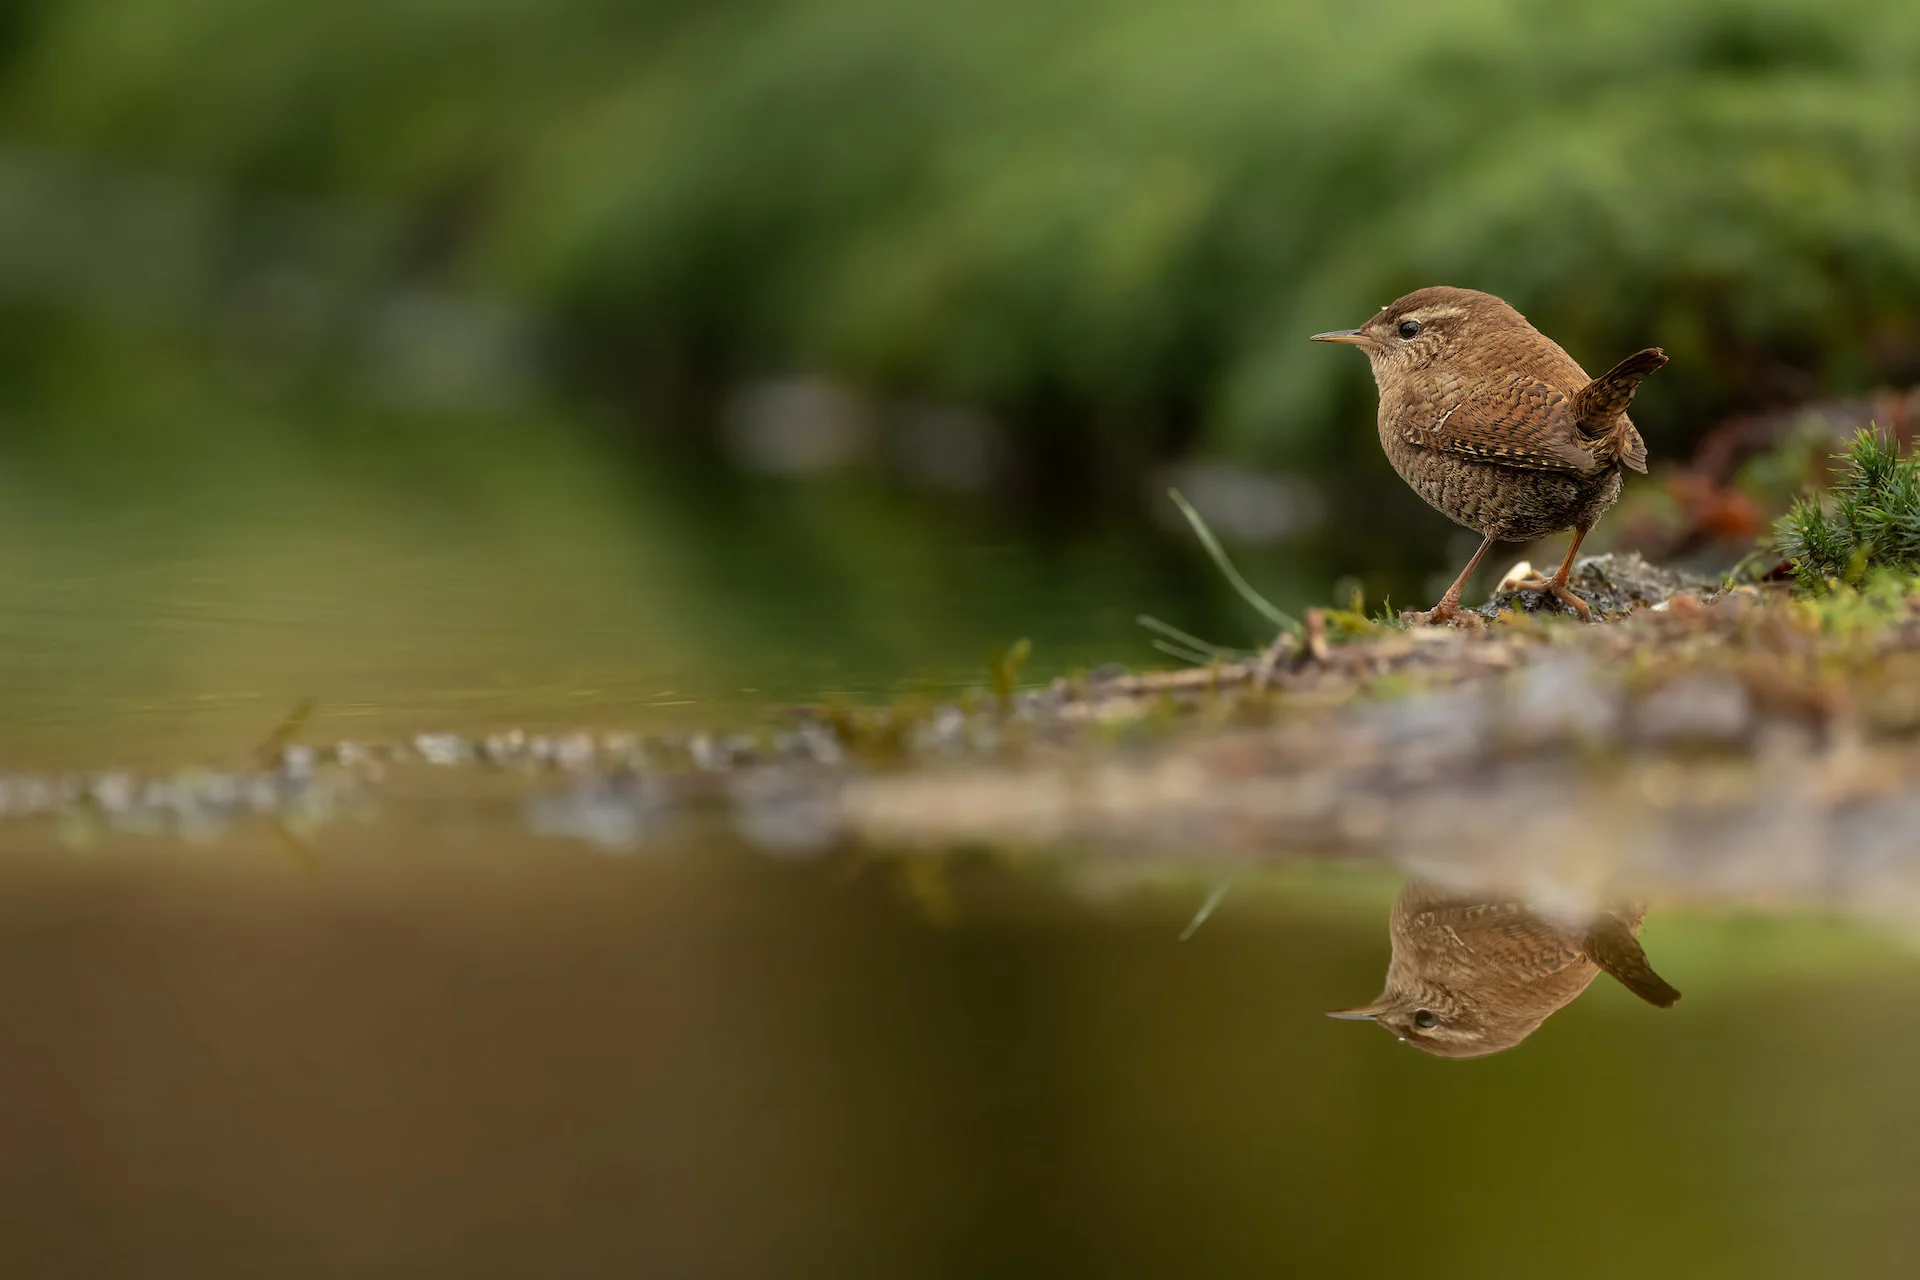 A small bird standing on the ground next to a body of water